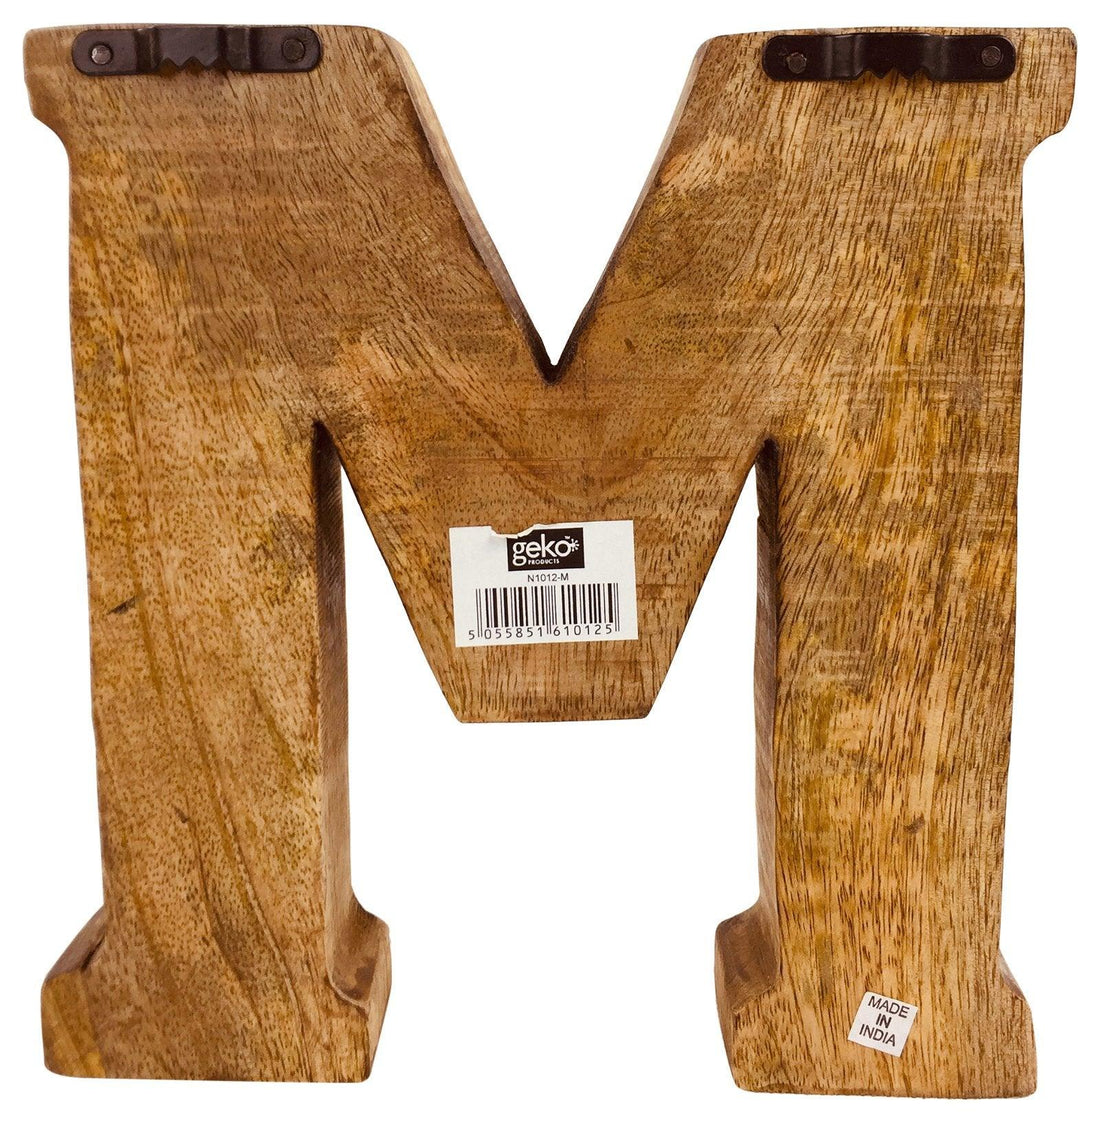 Hand Carved Wooden Geometric Letter M - £12.99 - Single Letters 